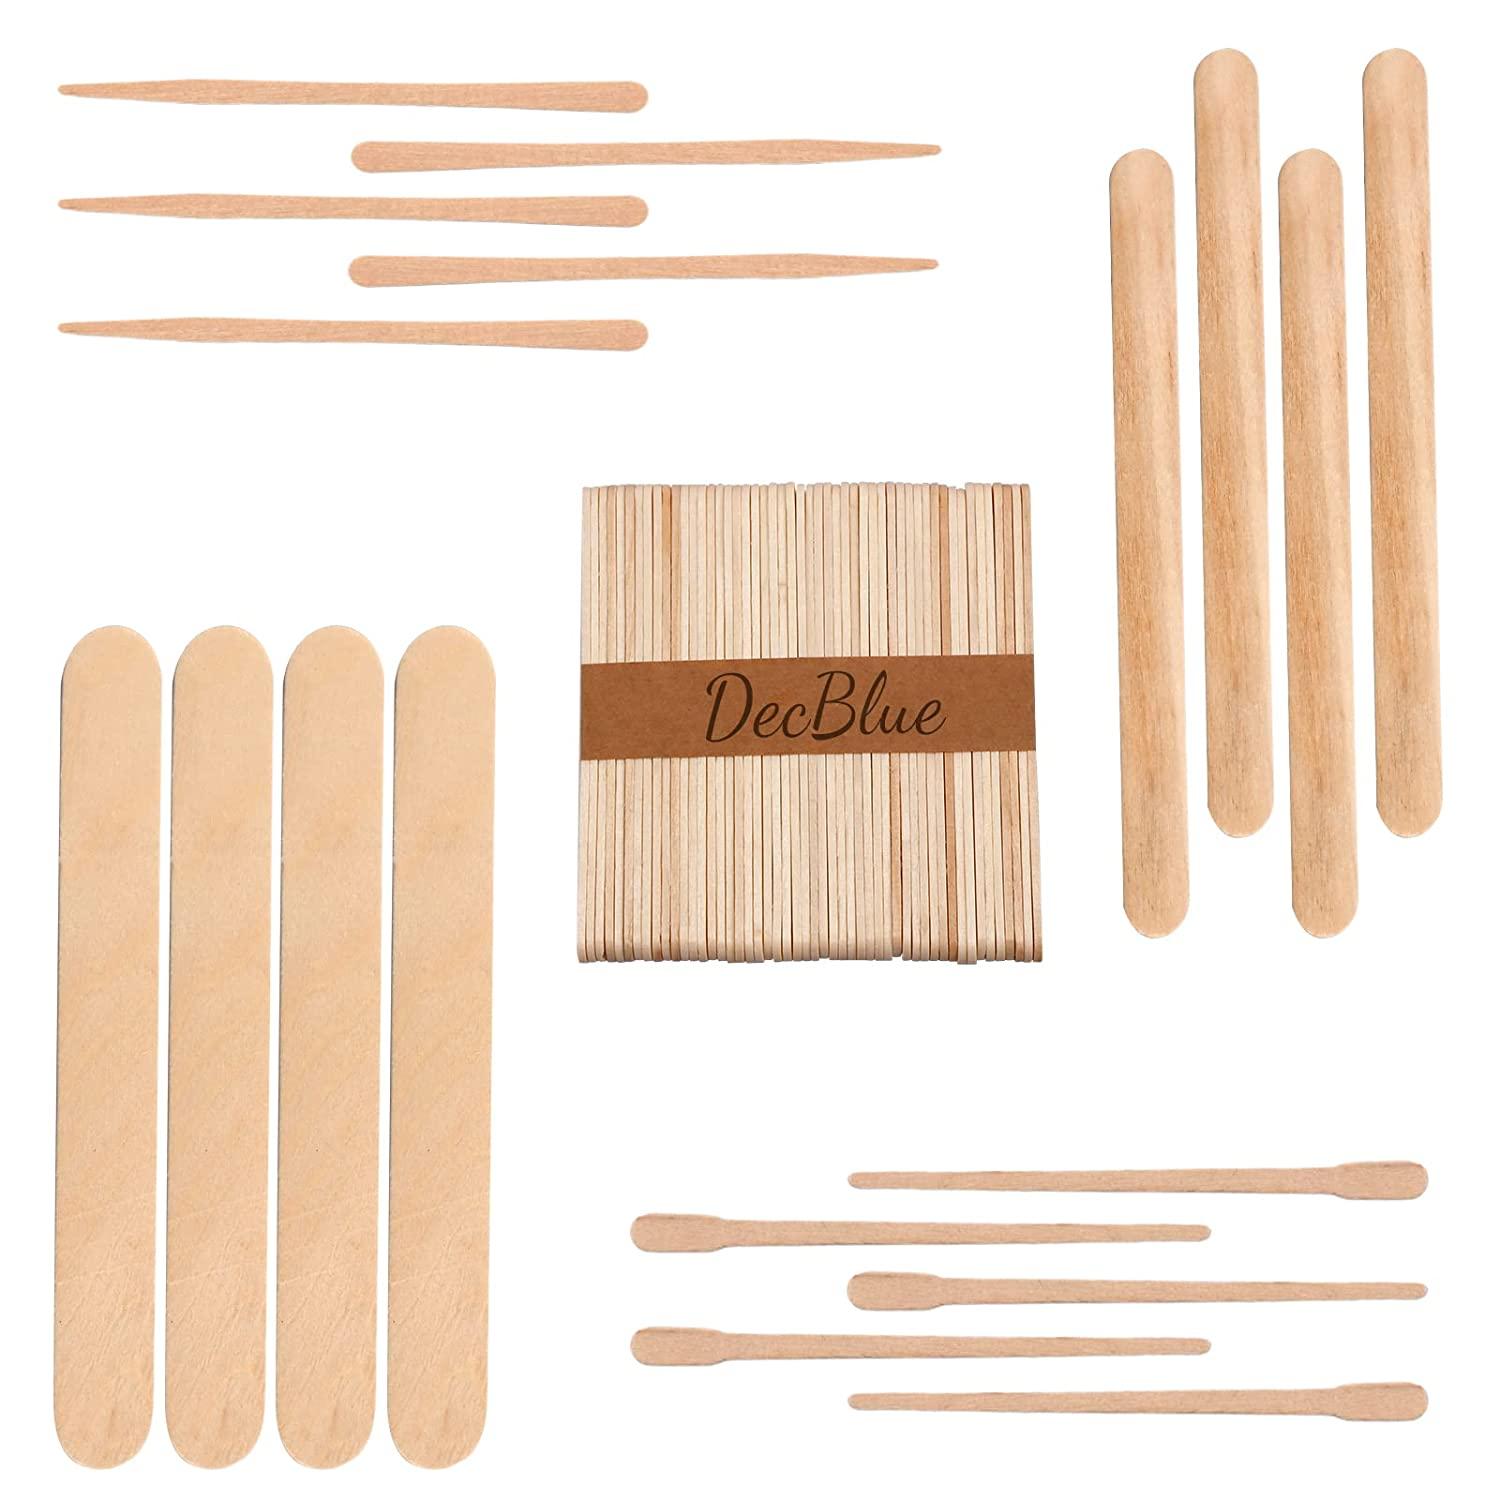 300Pcs Large Wax Waxing Sticks, HOOMBOOM Professional Wood Spatulas Waxing  Sticks Applicators for Hair Removal Eyebrow and Body